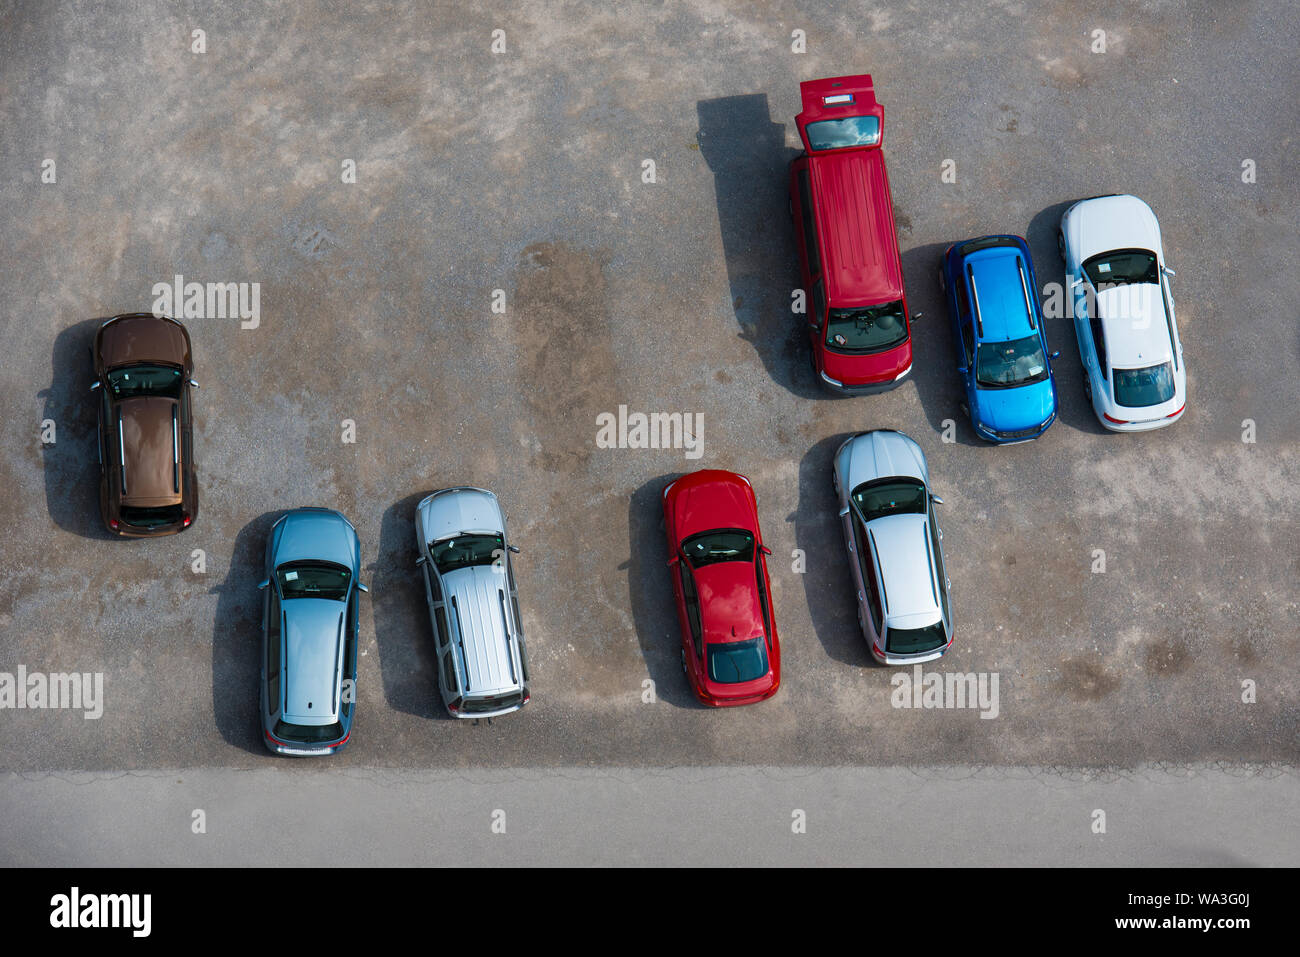 cars view from above Stock Photo